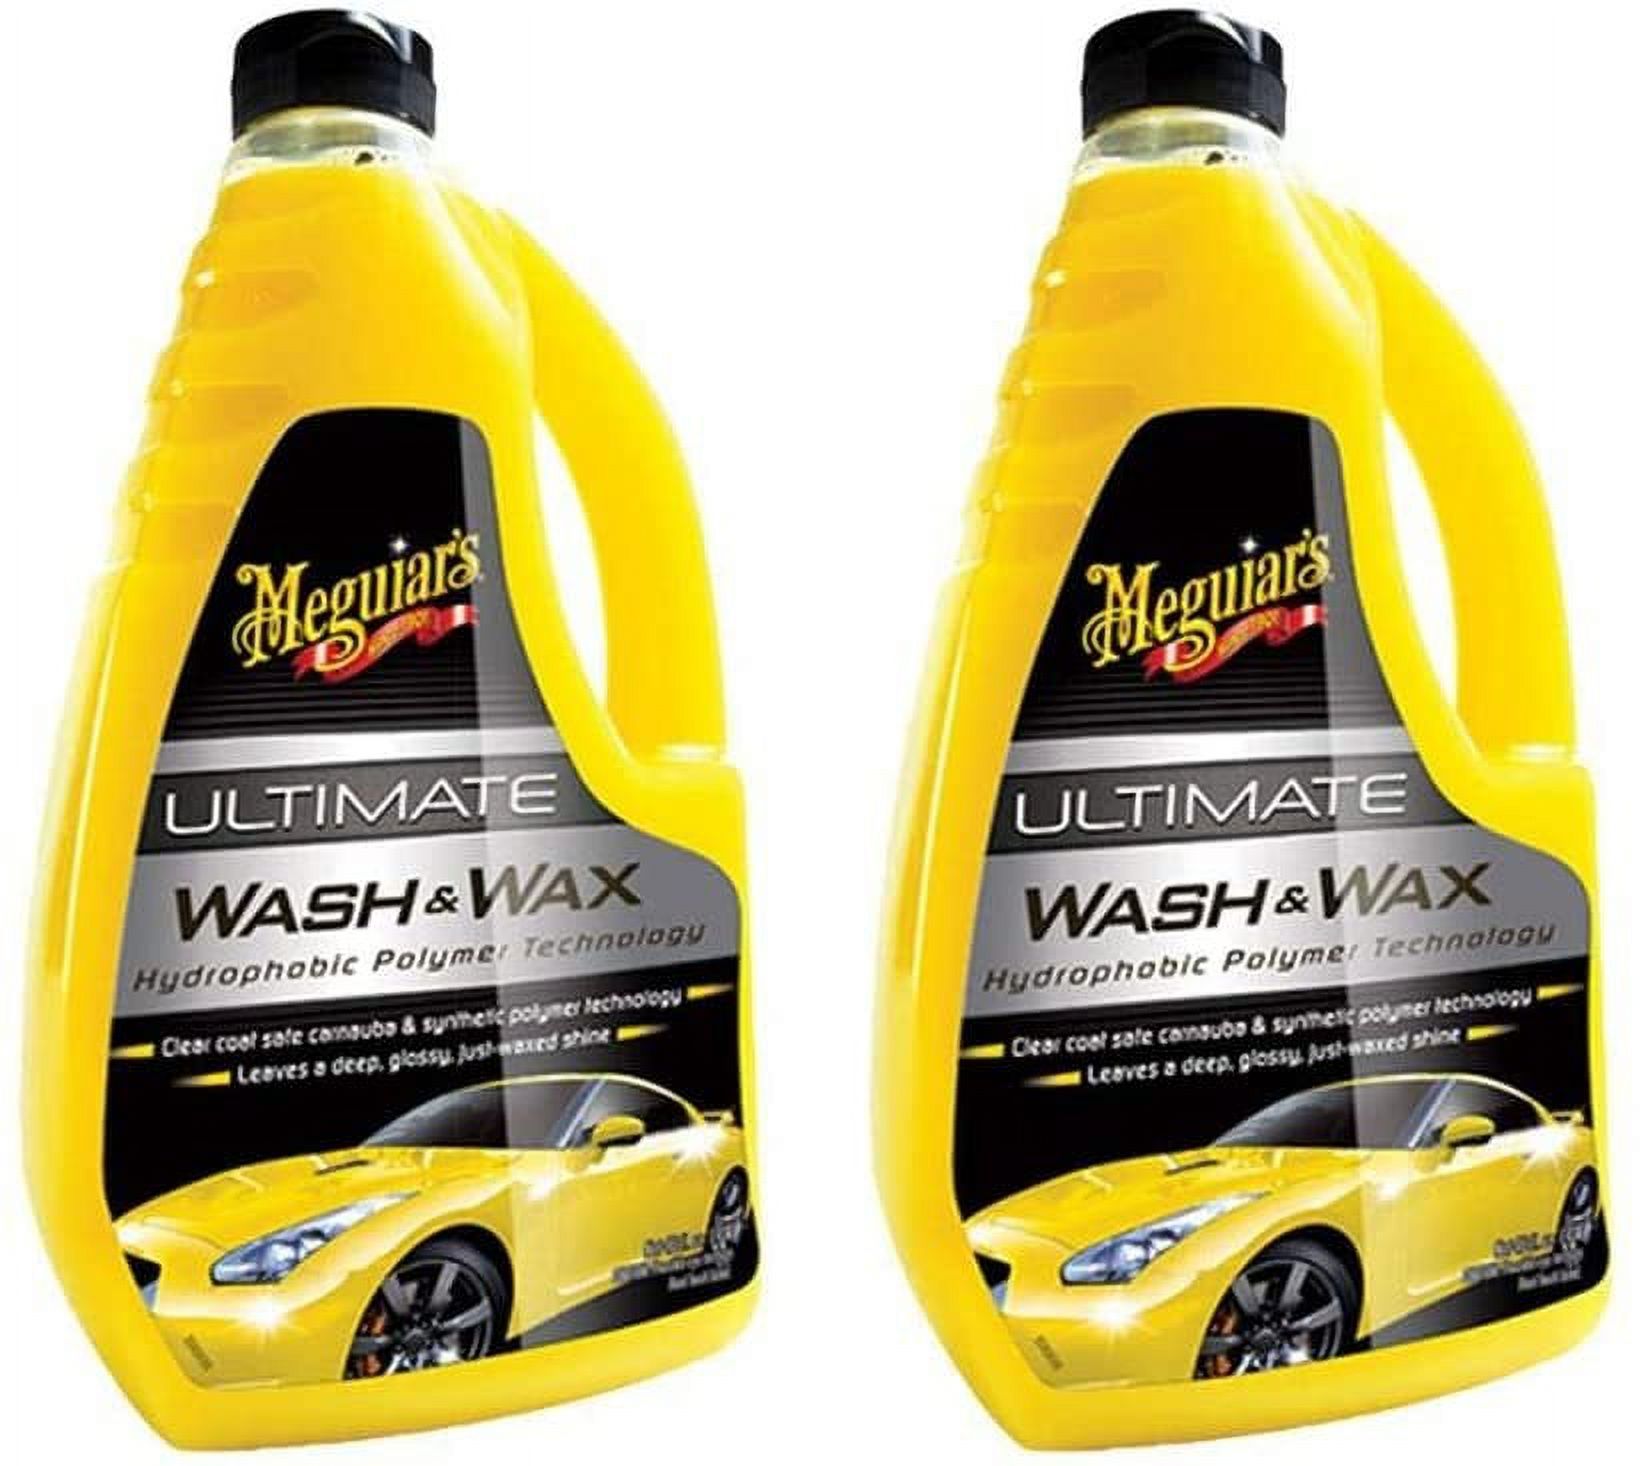 Meguiar's Ultimate Wash & Wax Car Care Cleaning Kit Solution, 48 Ounces (2 Pack) - image 1 of 2